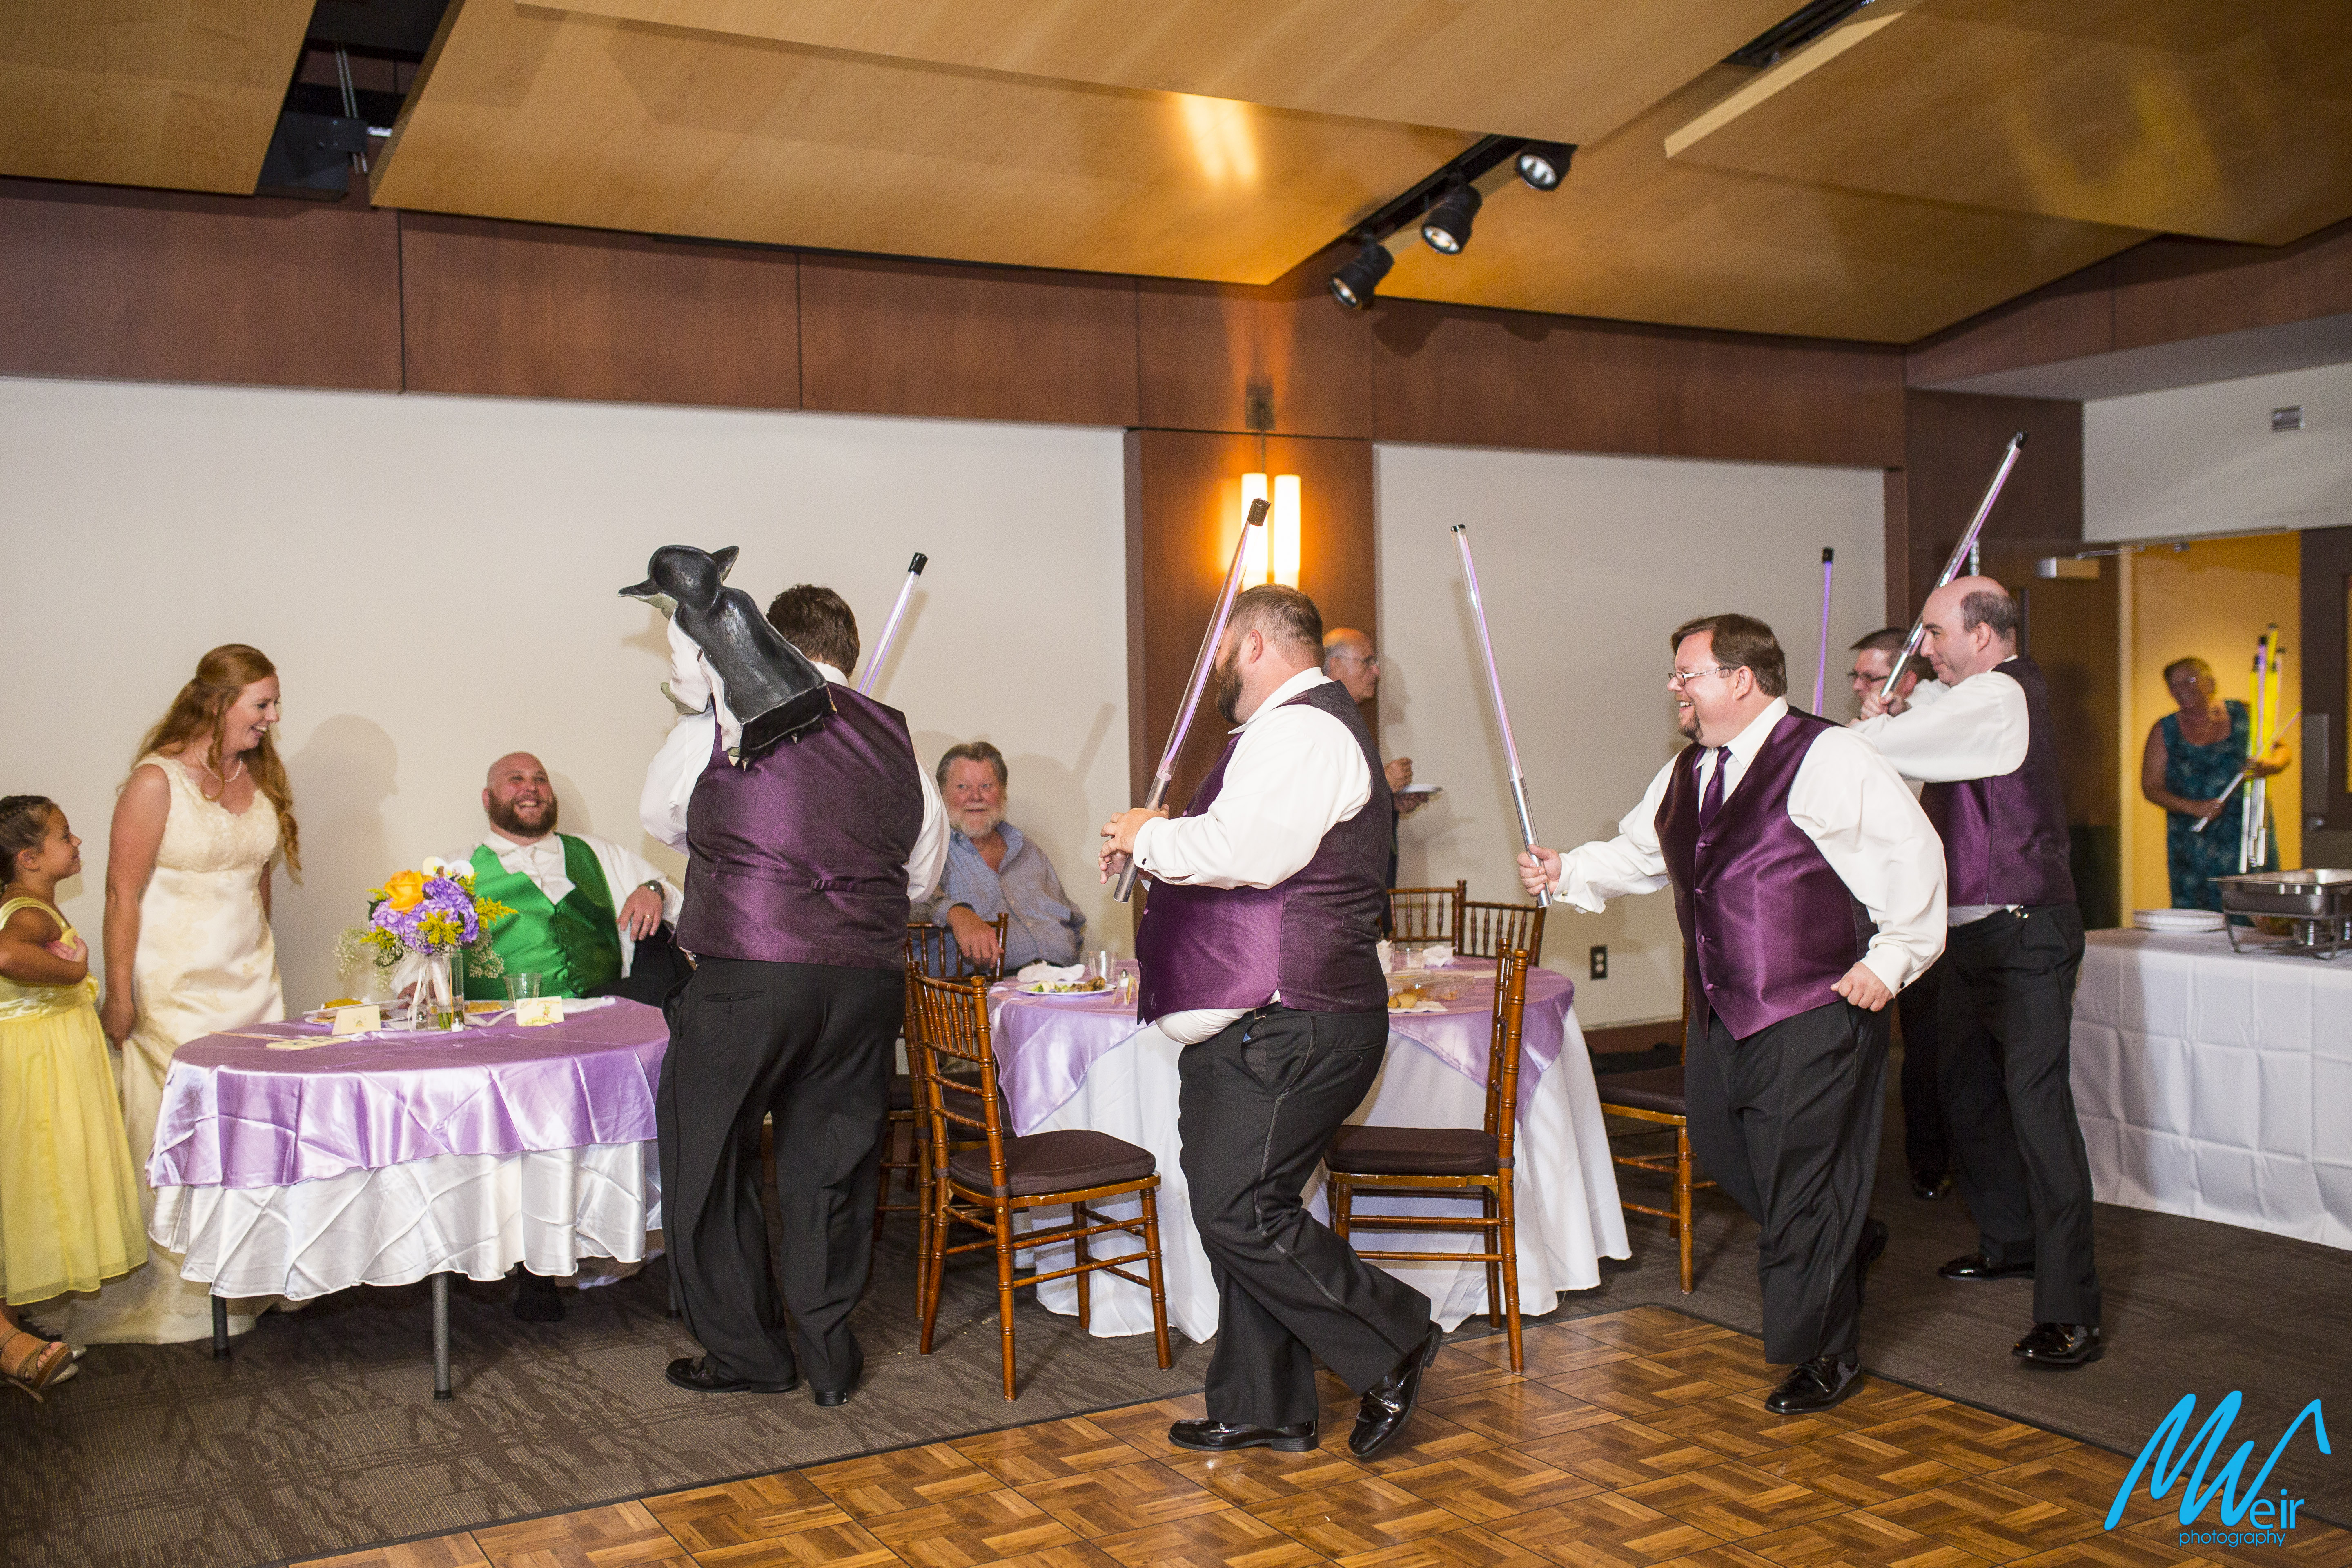 groomsmen surprise groom with star wars light sabers and yoda